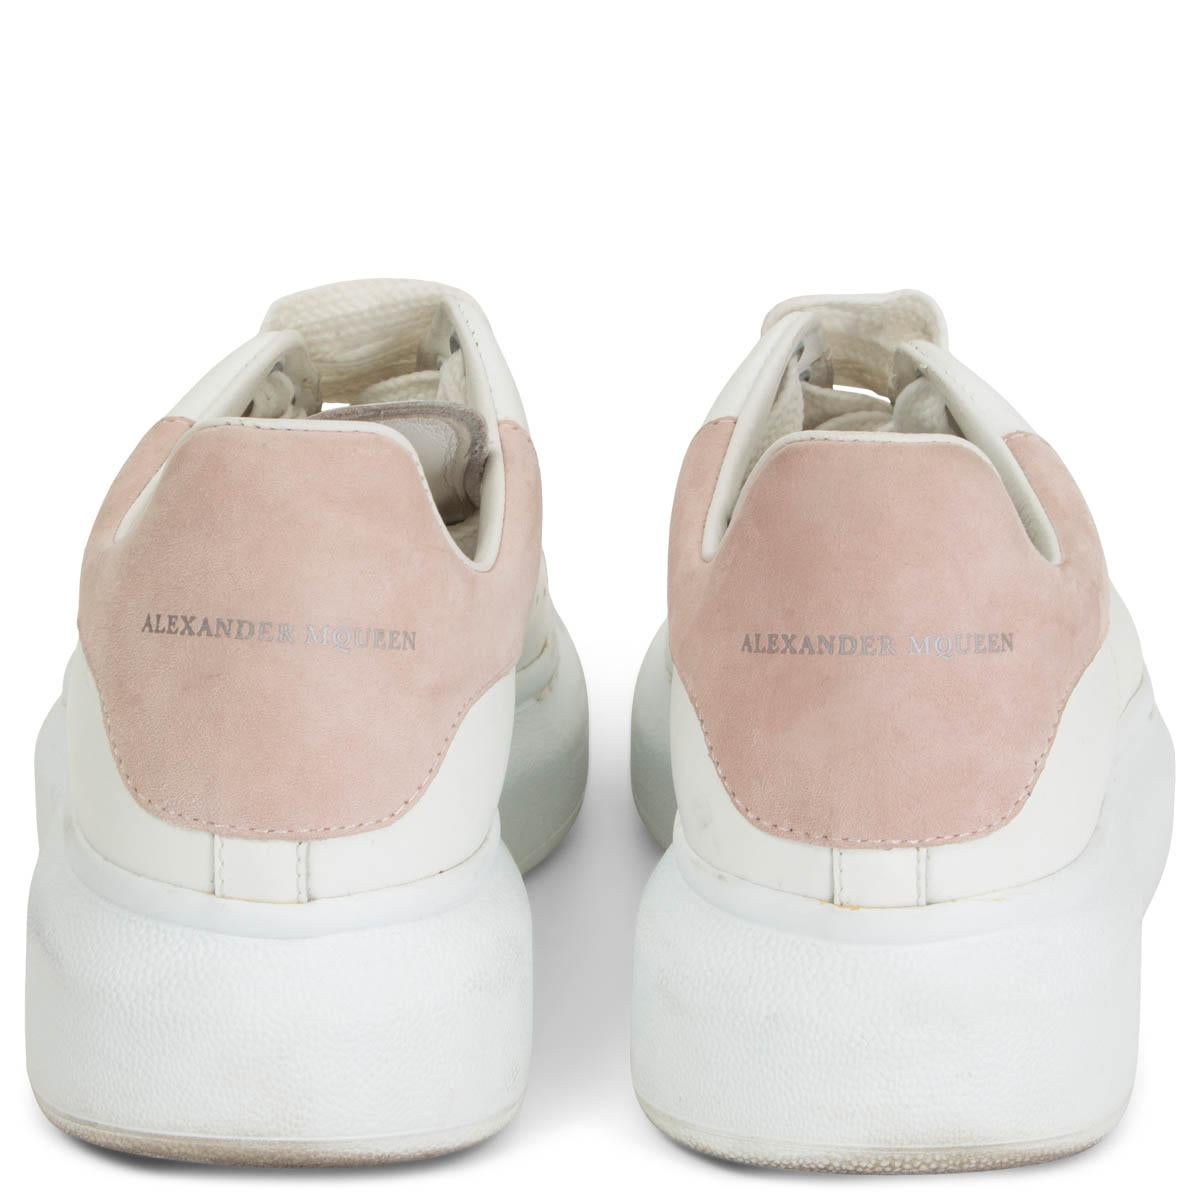 Gray ALEXANDER MCQUEEN white leather OVERSIZED Sneakers Shoes 37.5